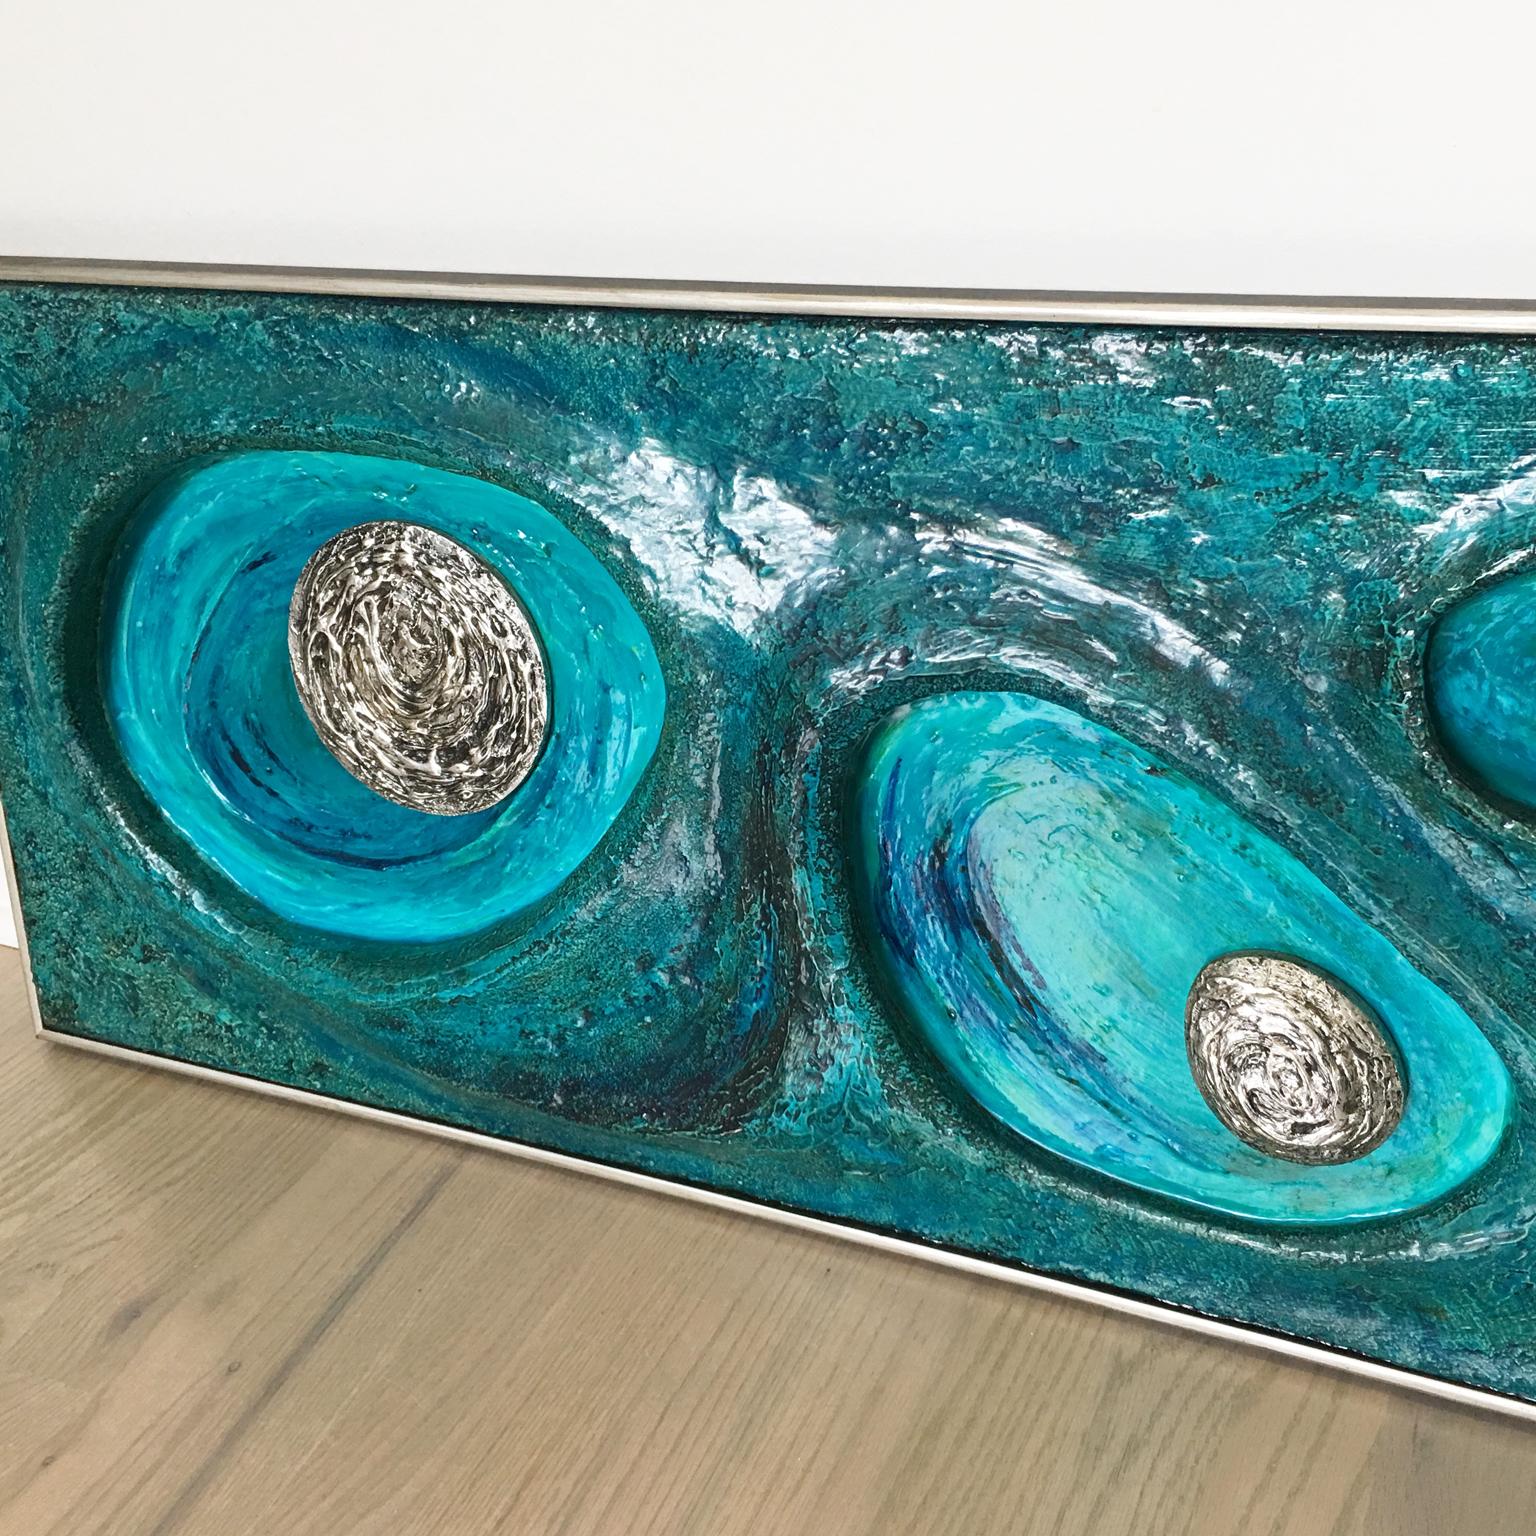 Psychedelic Turquoise Acrylic Resin Art Wall Sculpture Panel by Lorraine Stelzer For Sale 8